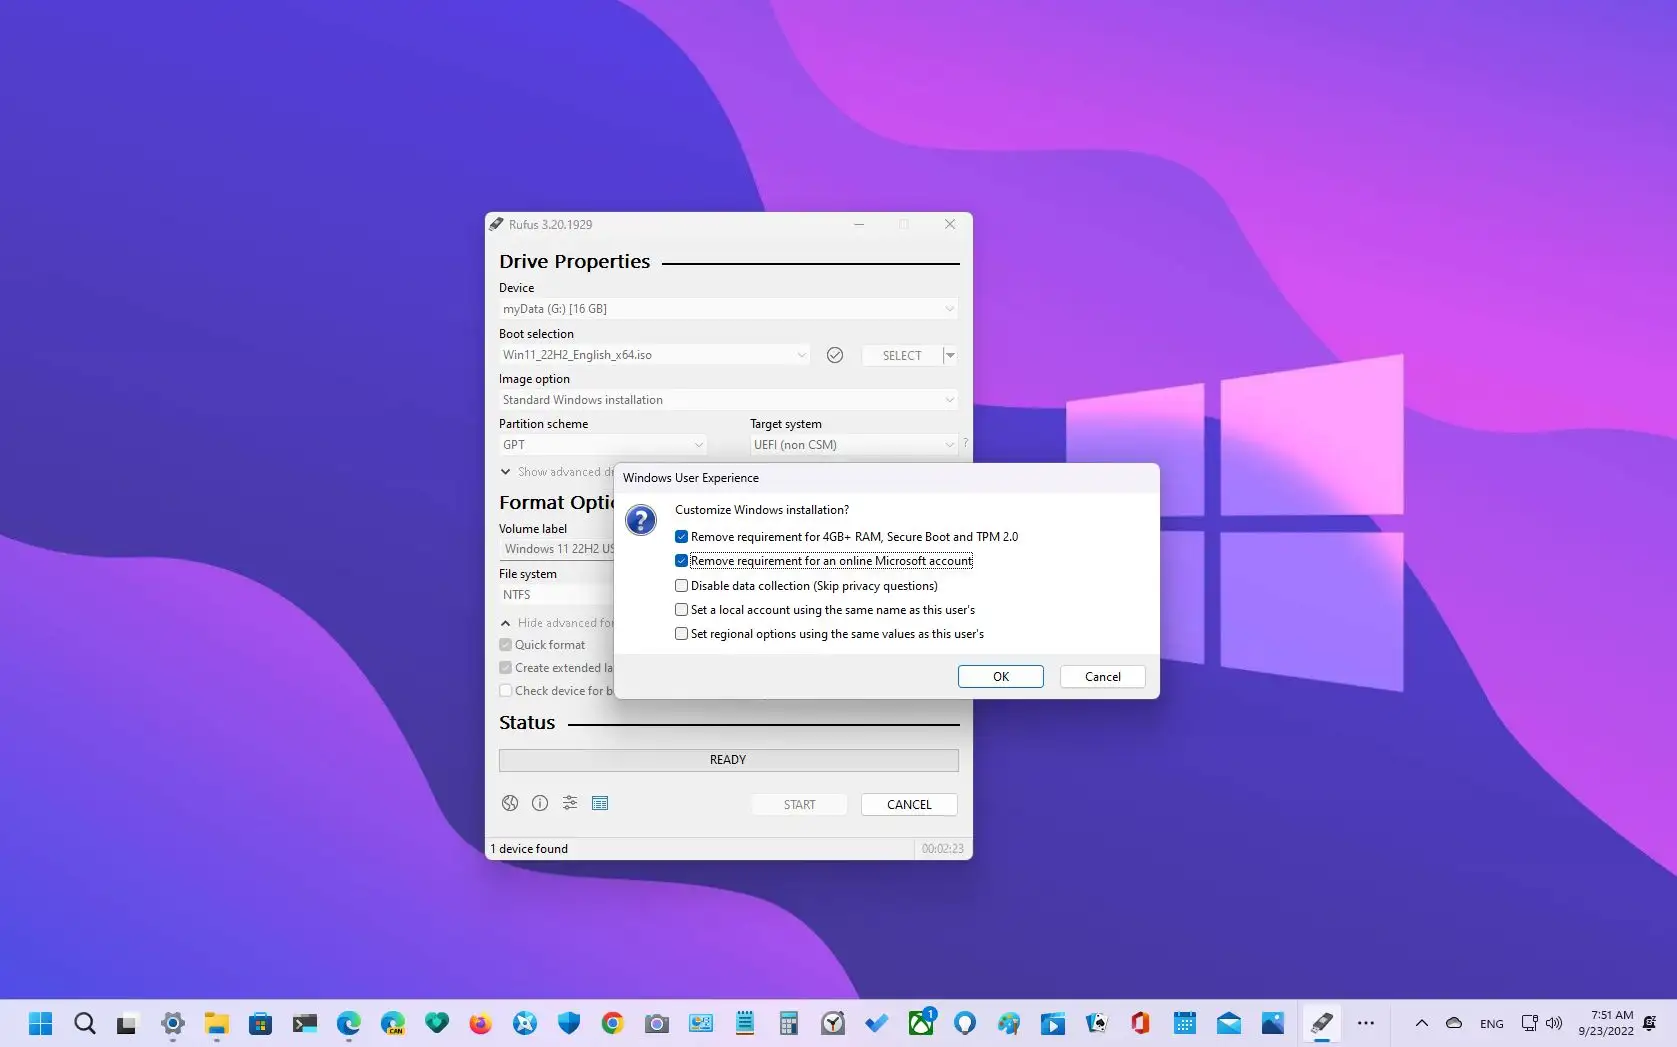 madras finansiere samlet set How to use Rufus to create bootable Windows 11 22H2 USB - Pureinfotech